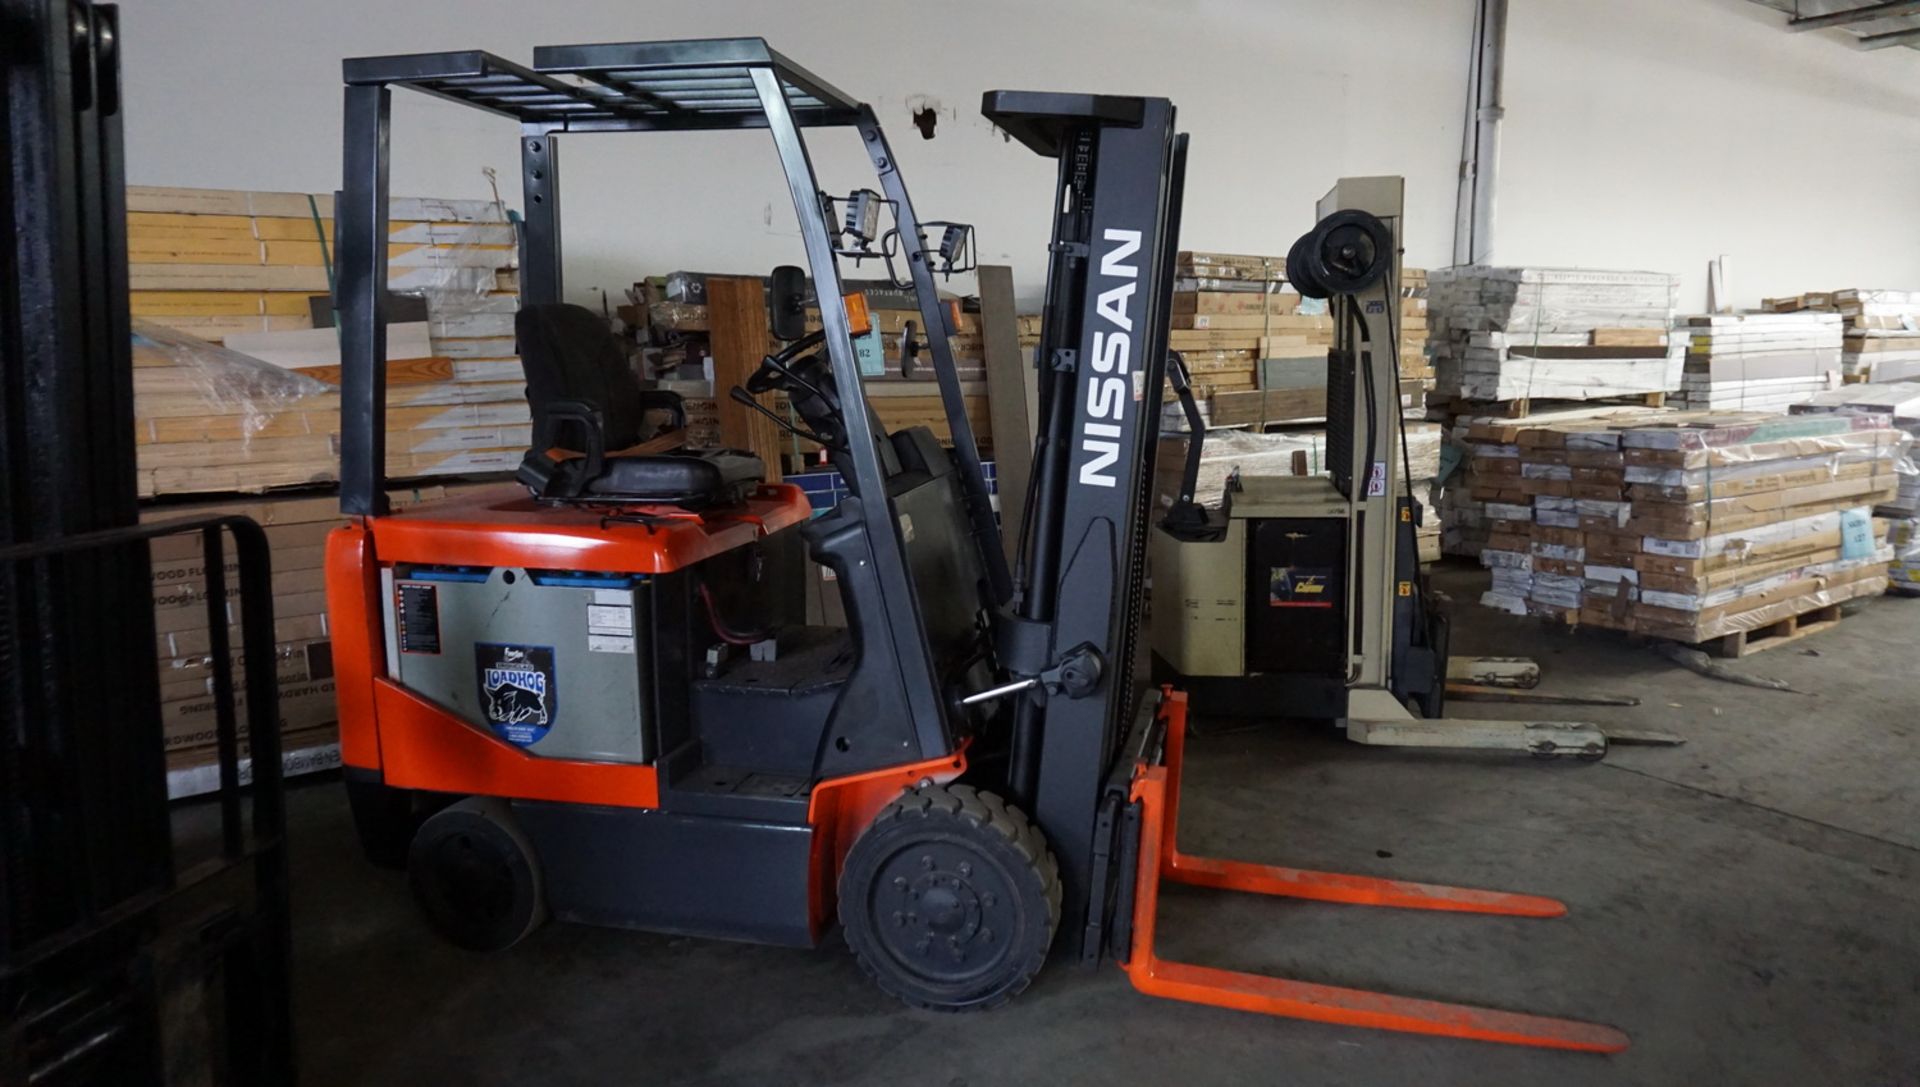 NISSAN CP1B2L25BS ELECTRIC 5,000LBS CAP FORKLIFT W/ 187" LIFT, 3-STAGE MAST, SIDE SHIFT, S/N CP1B2- - Image 2 of 10